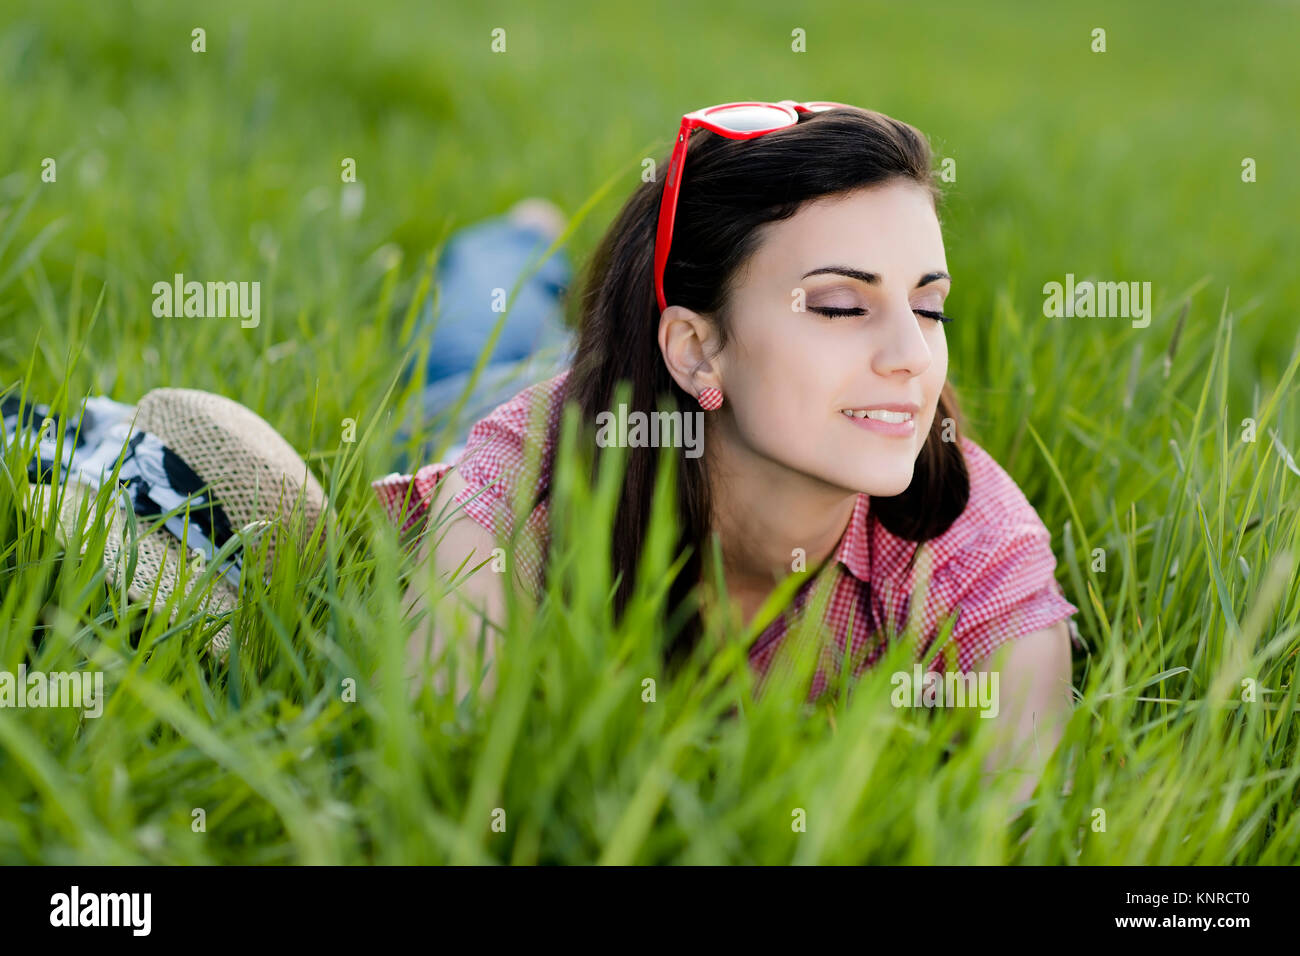 Junge Frau liegt in der Fruehlingswiese - Young woman relaxing on the spring meadow Stock Photo